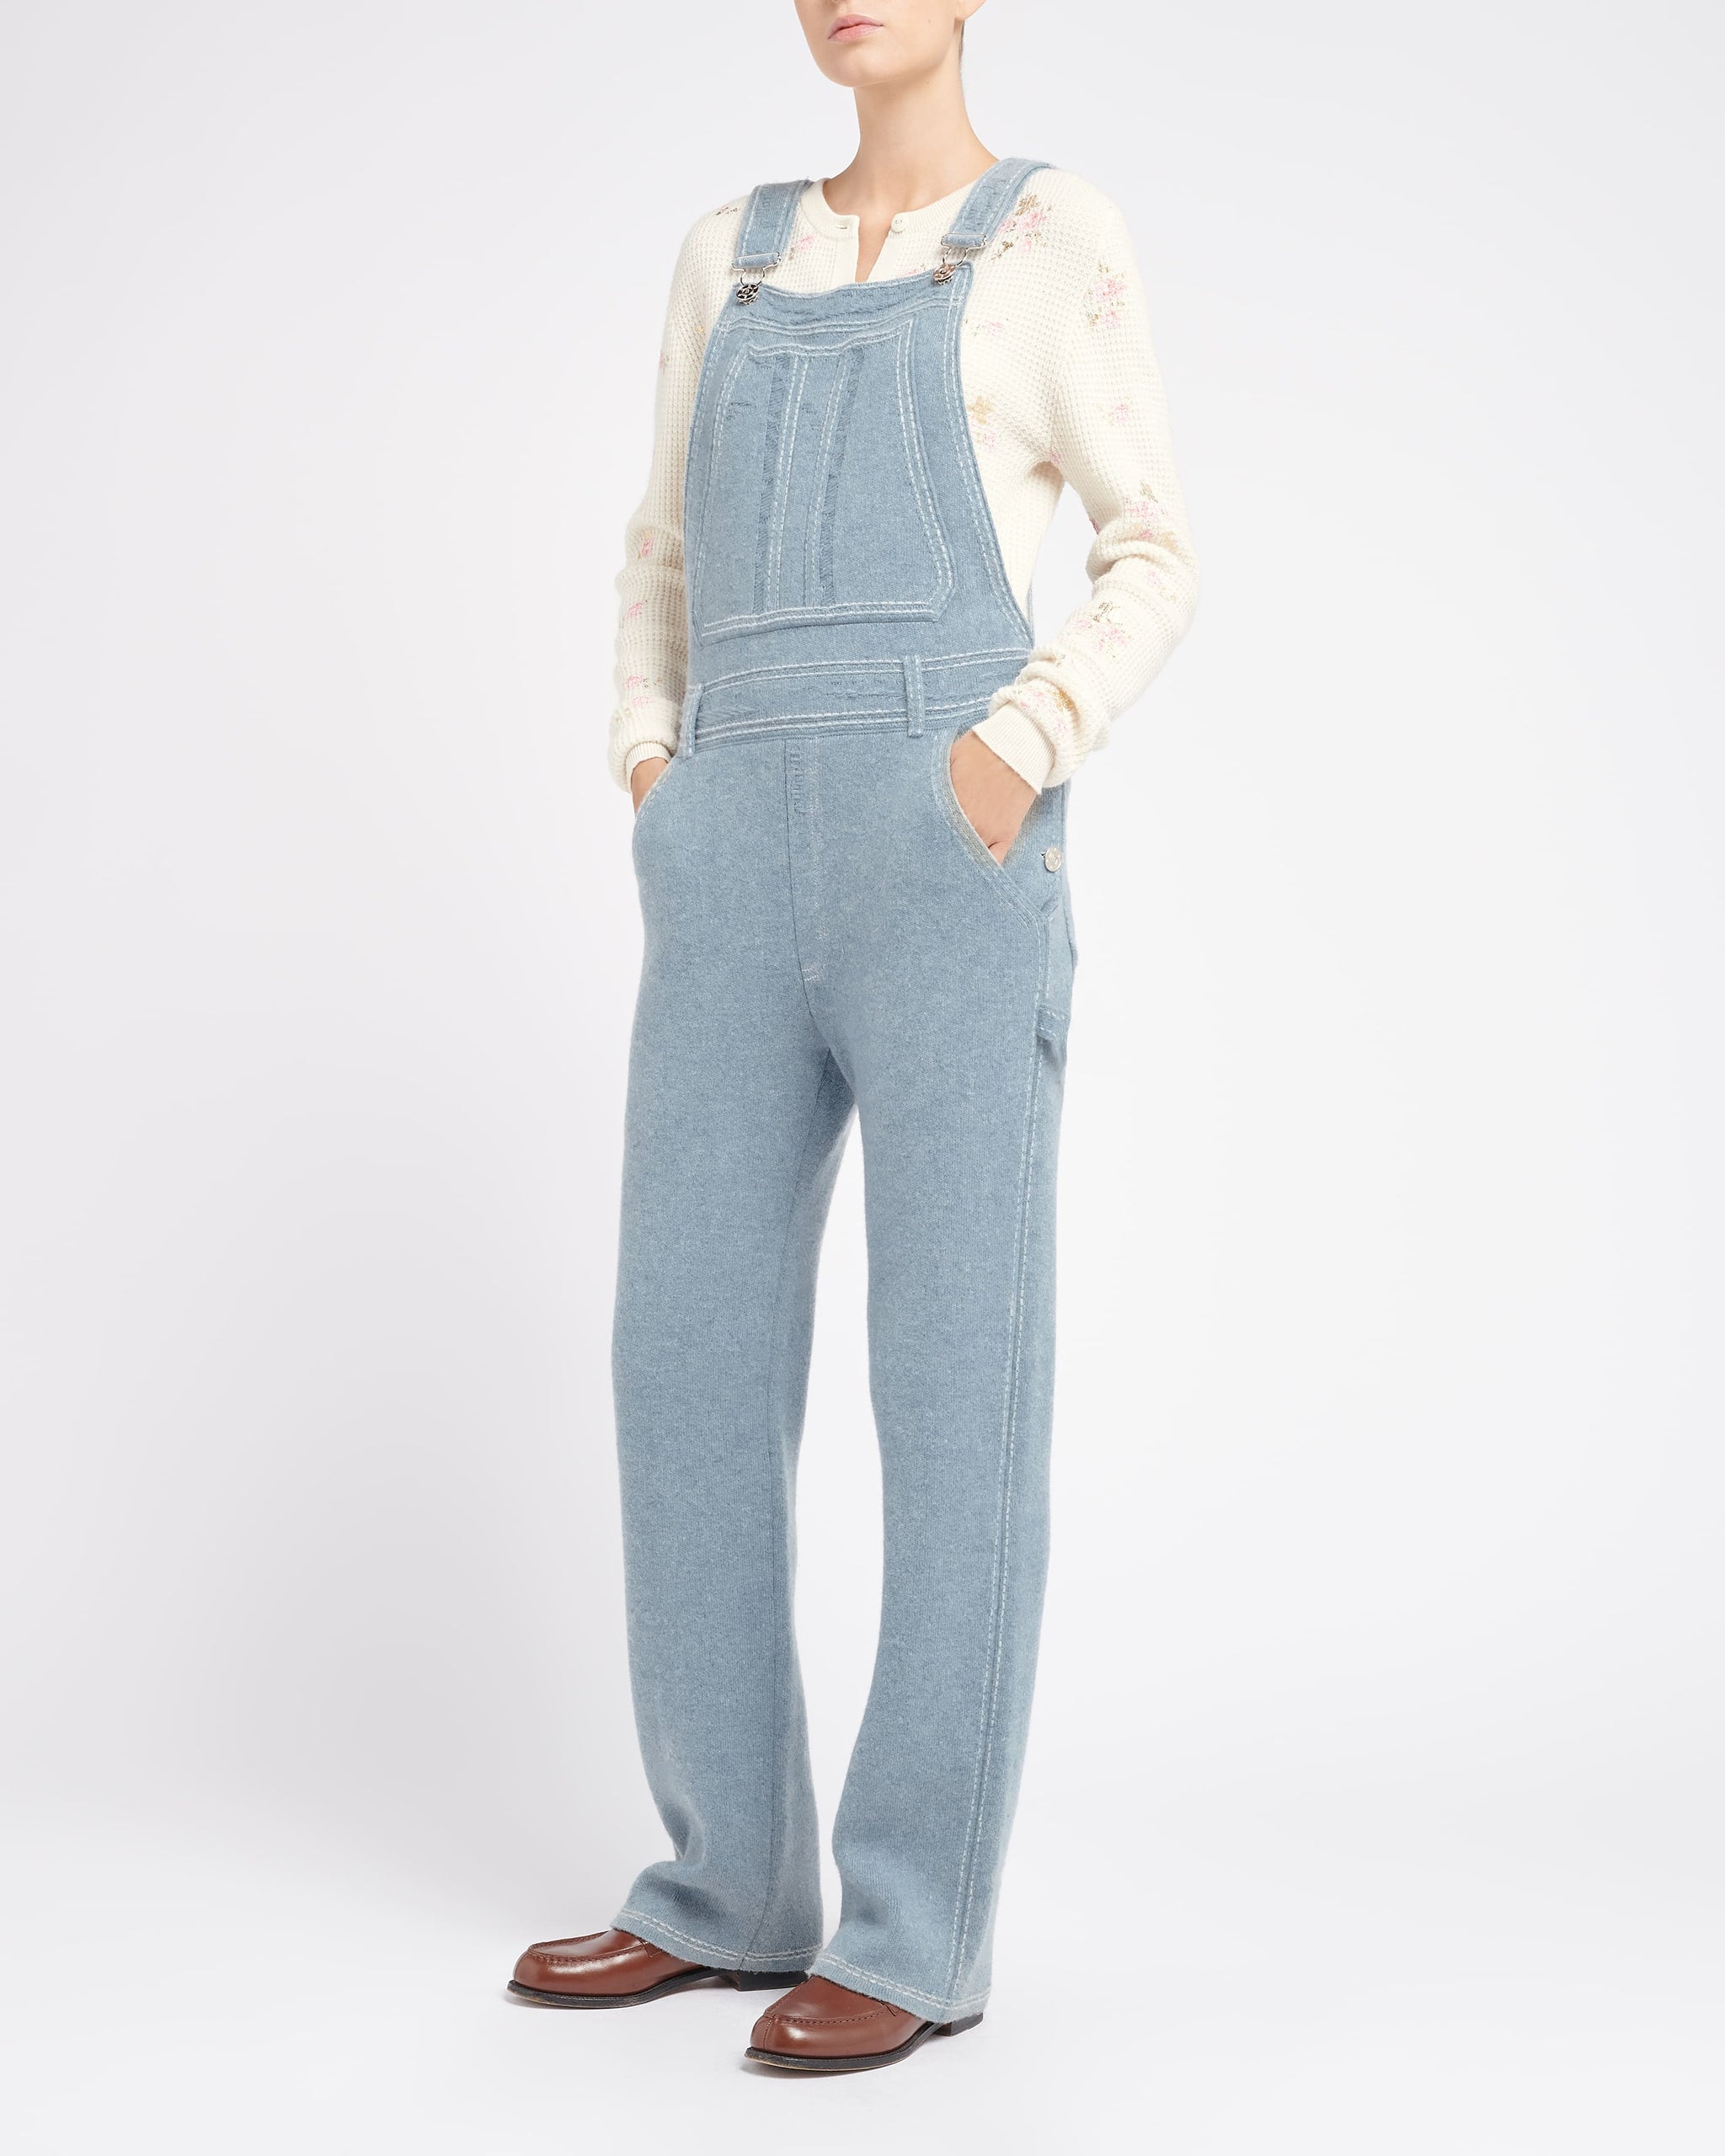 Buy Gap Blue Dungarees Dress from Next Luxembourg